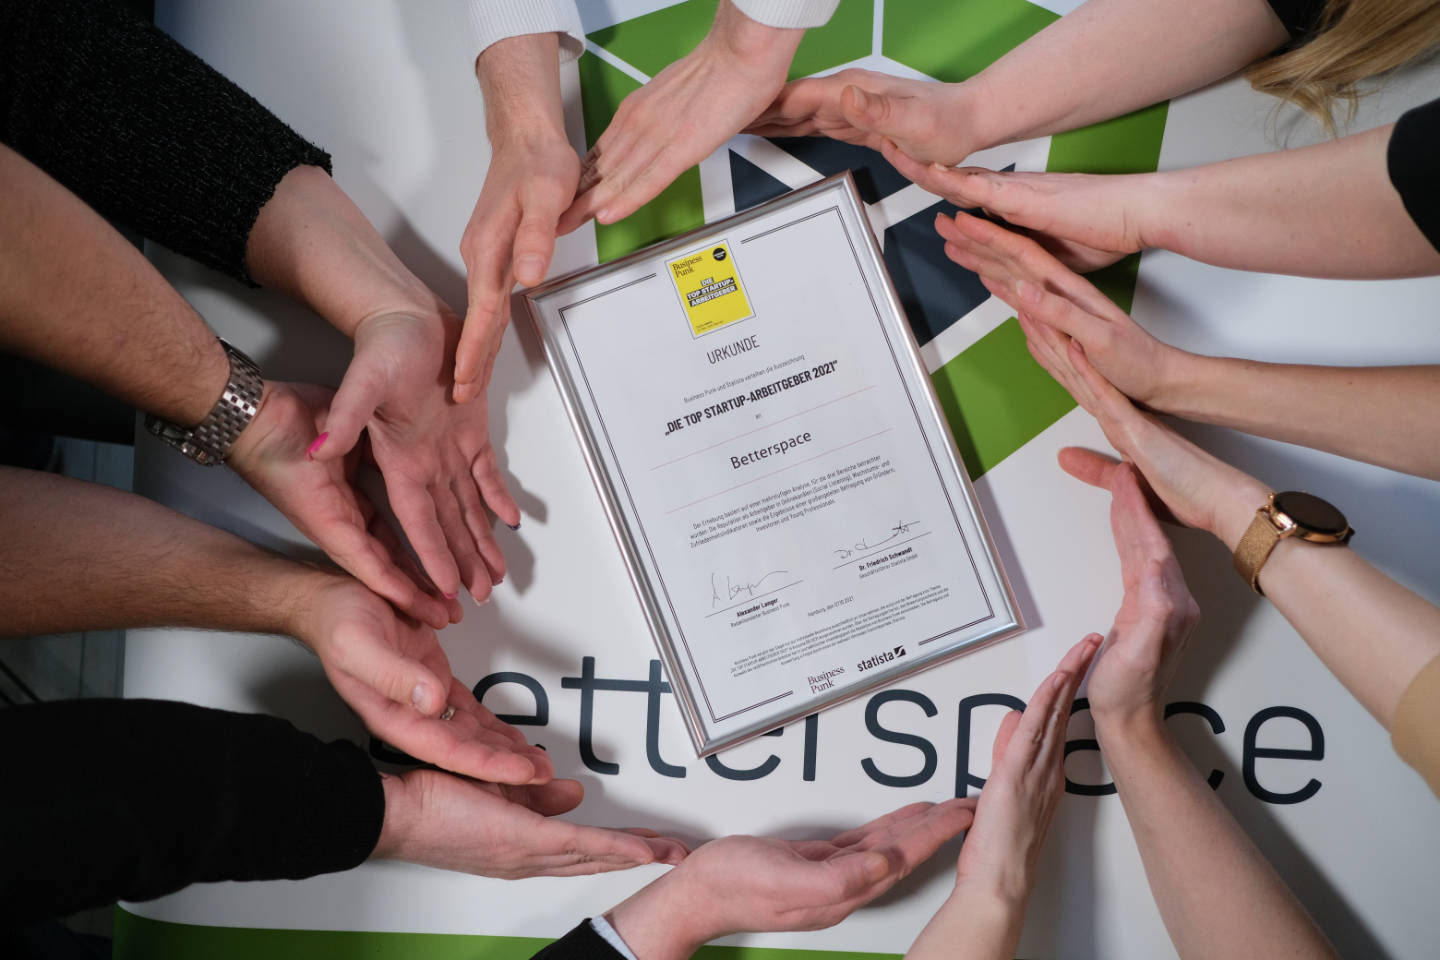 Betterspace awarded as top employer 2021